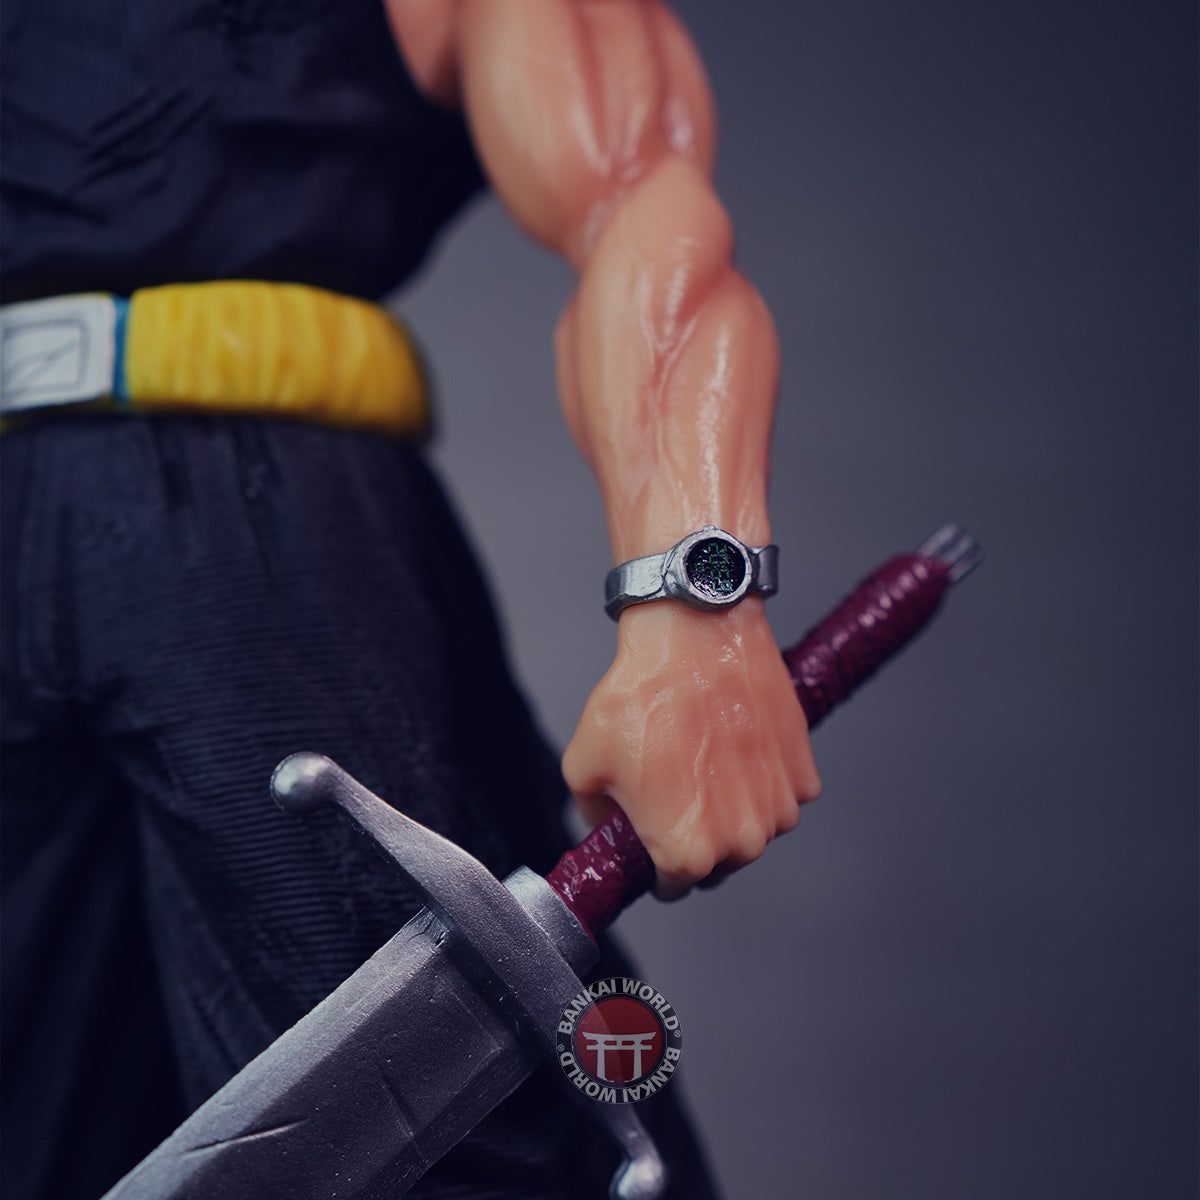 Trunks With Sword Giant Action Figure